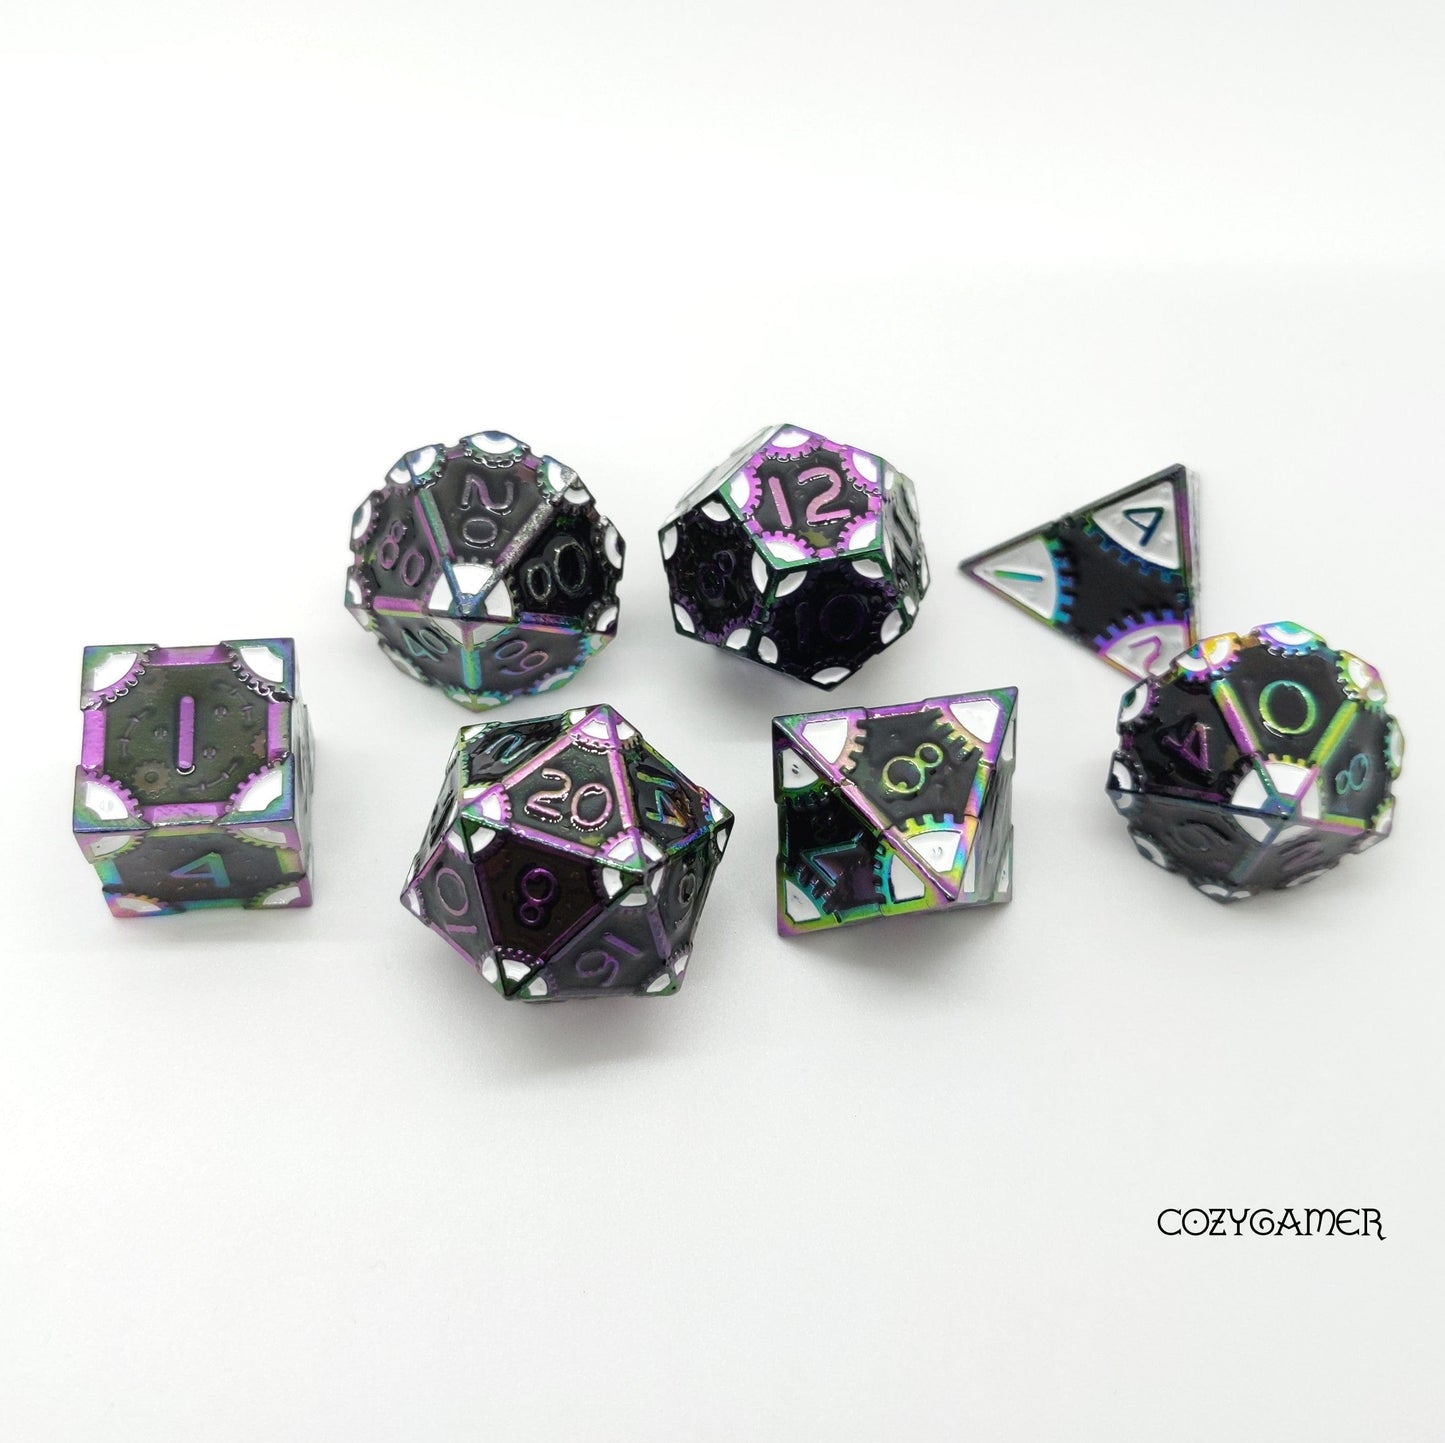 Black and White Gear Metal Dice Set with Rainbow Trim